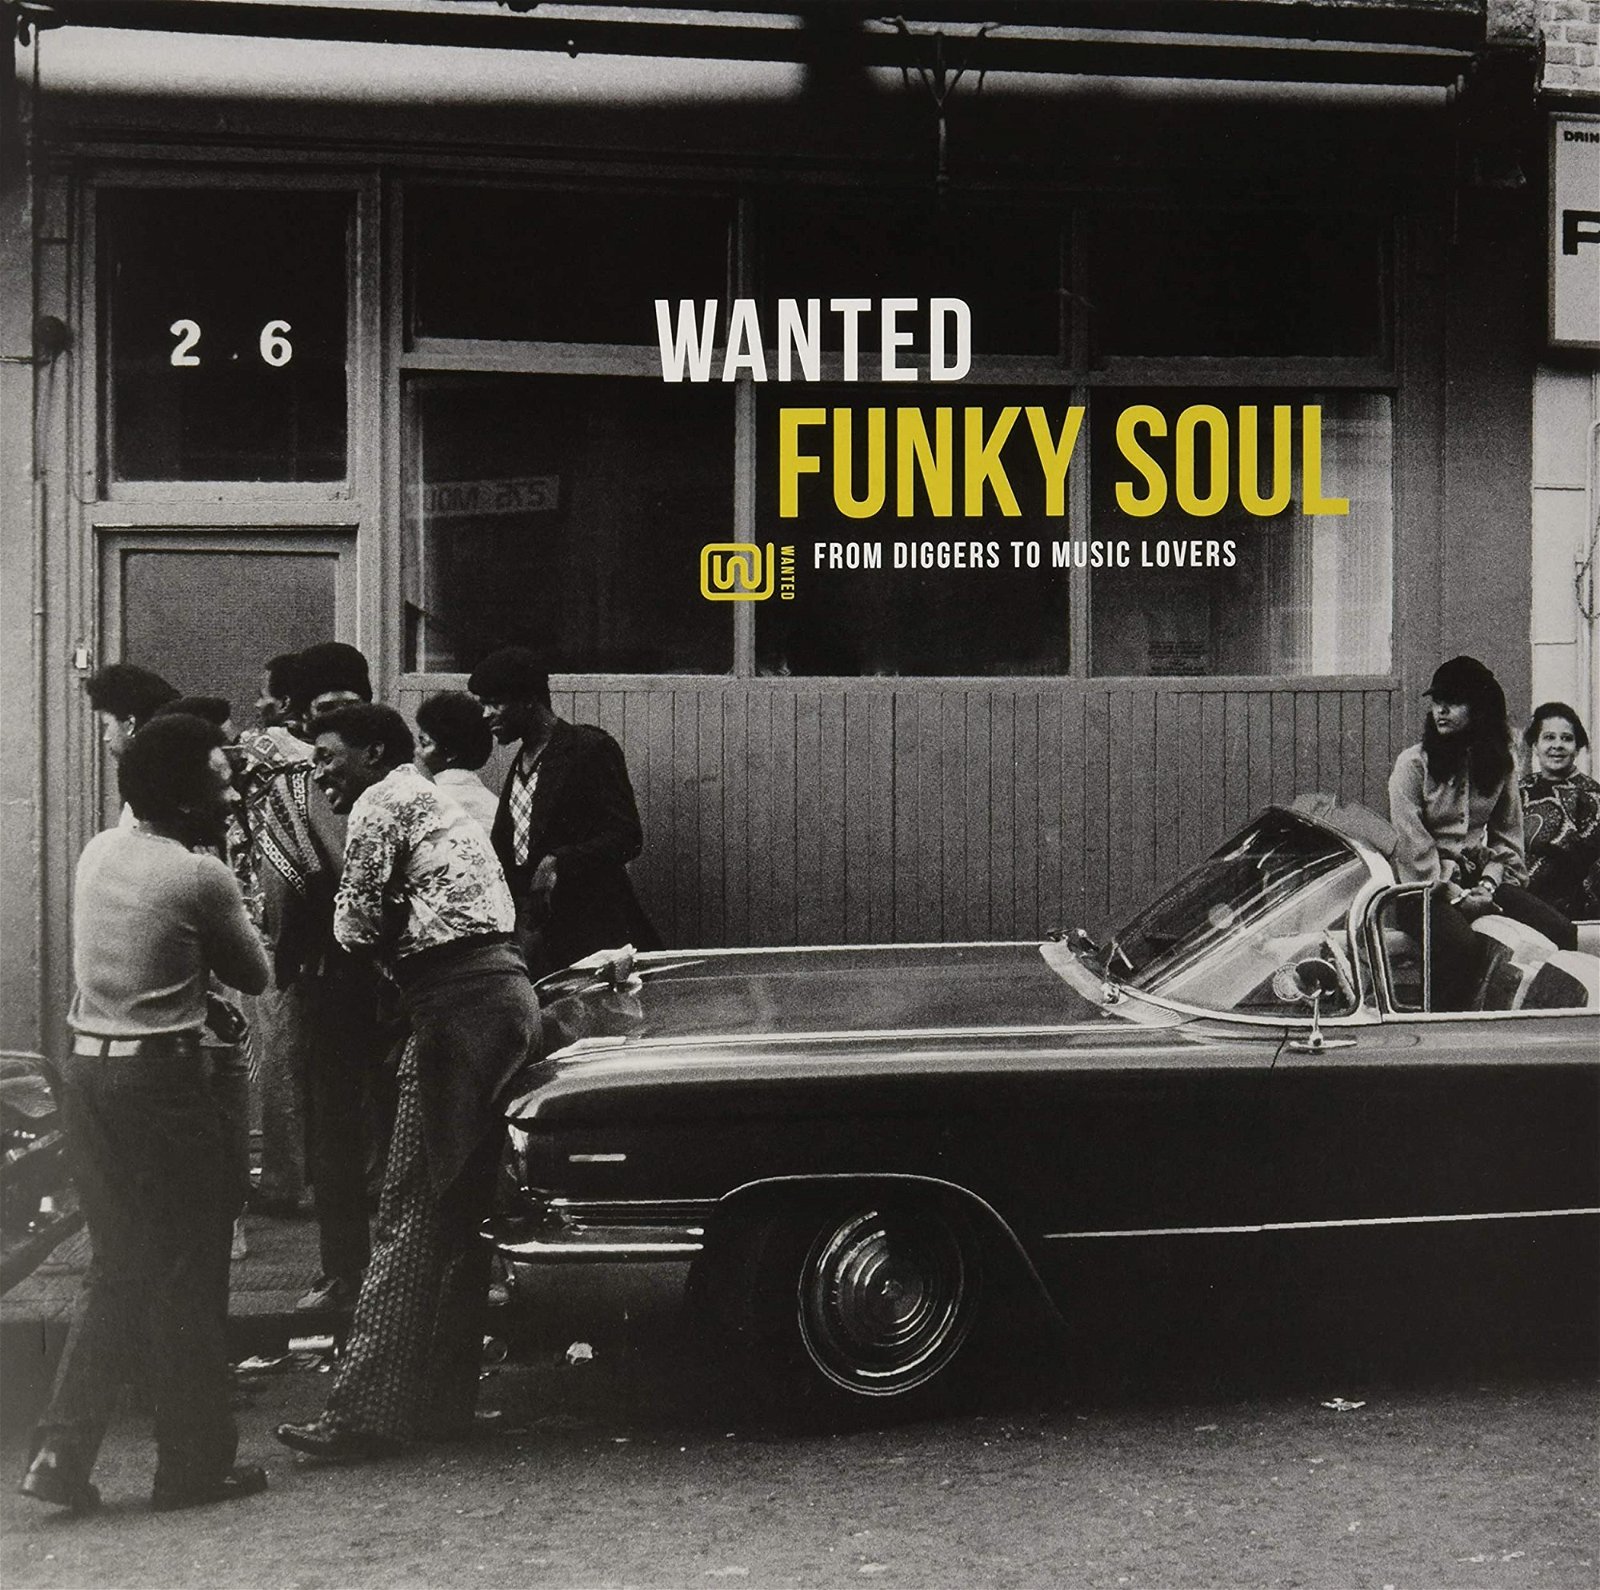 CD Shop - V/A WANTED FUNKY SOUL: FROM DIGGERS TO MUSIC LOVERS